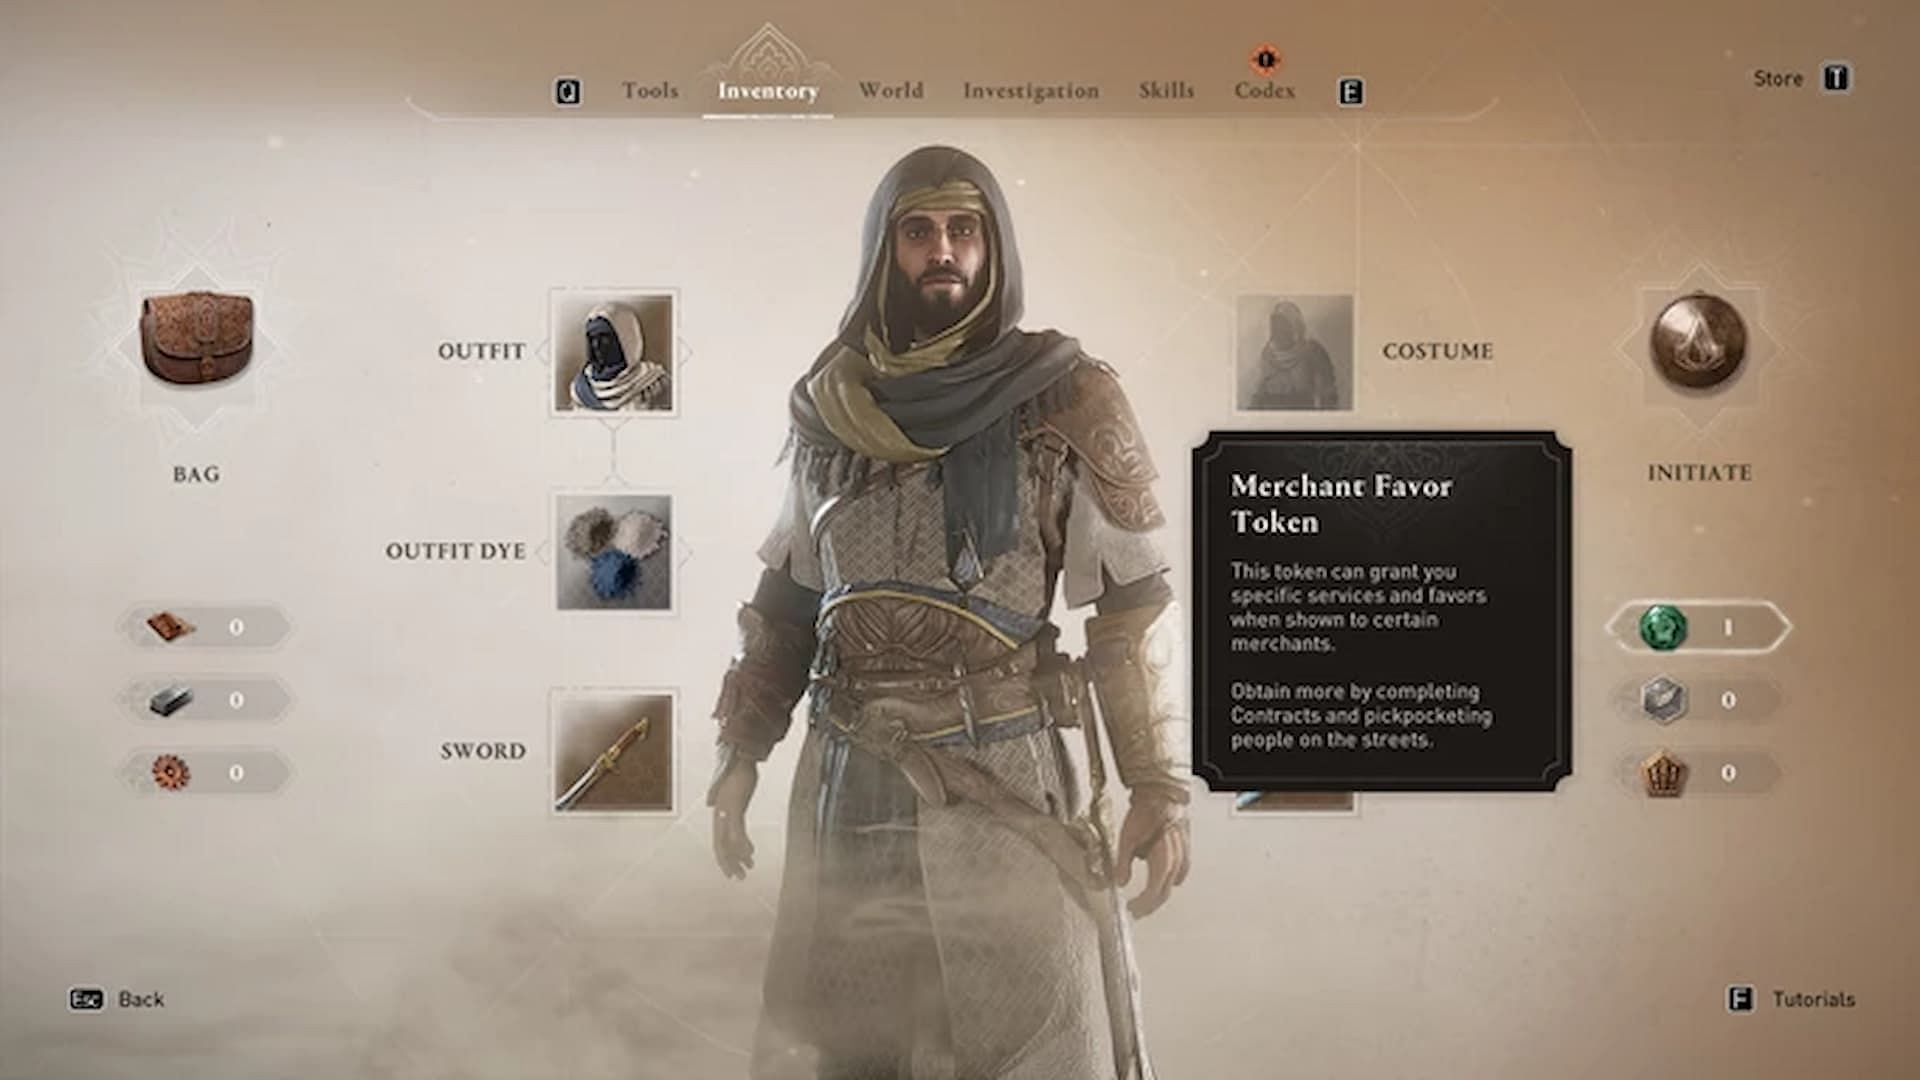 Obtain Merchant Favor Tokens by completing contracts (Image via Ubisoft)